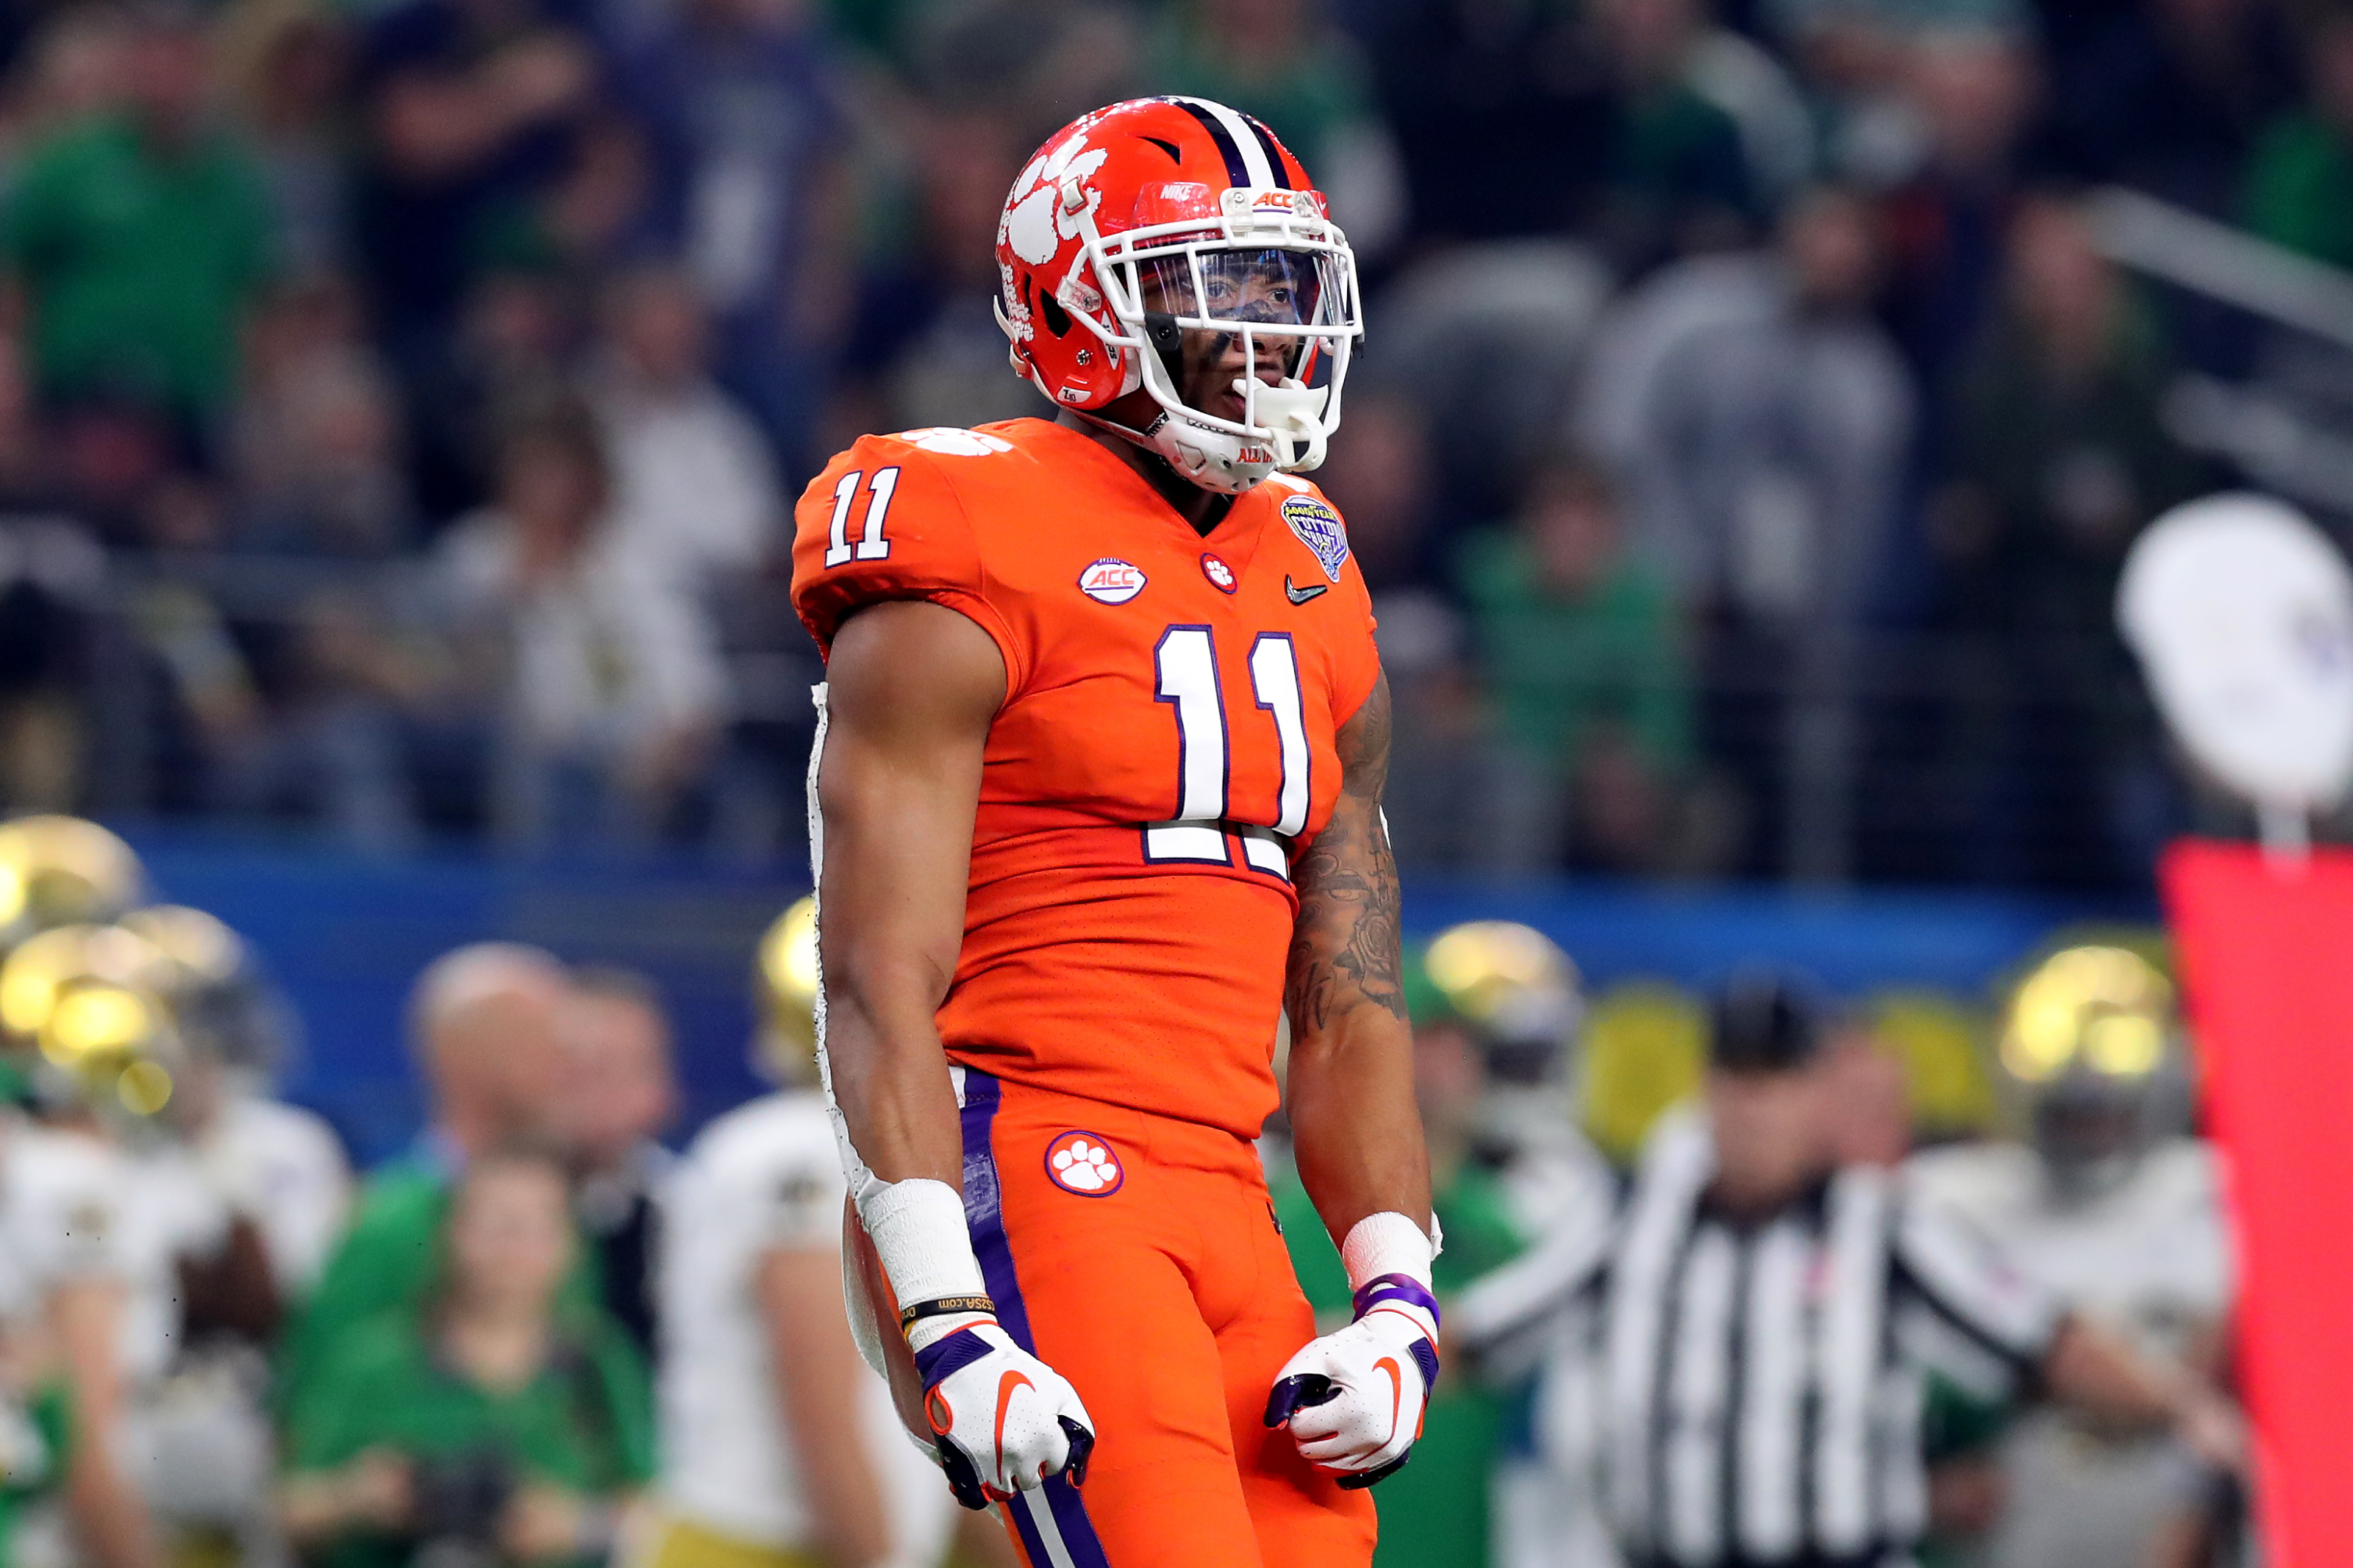 Detroit Lions: Isaiah Simmons crushed the NFL combine